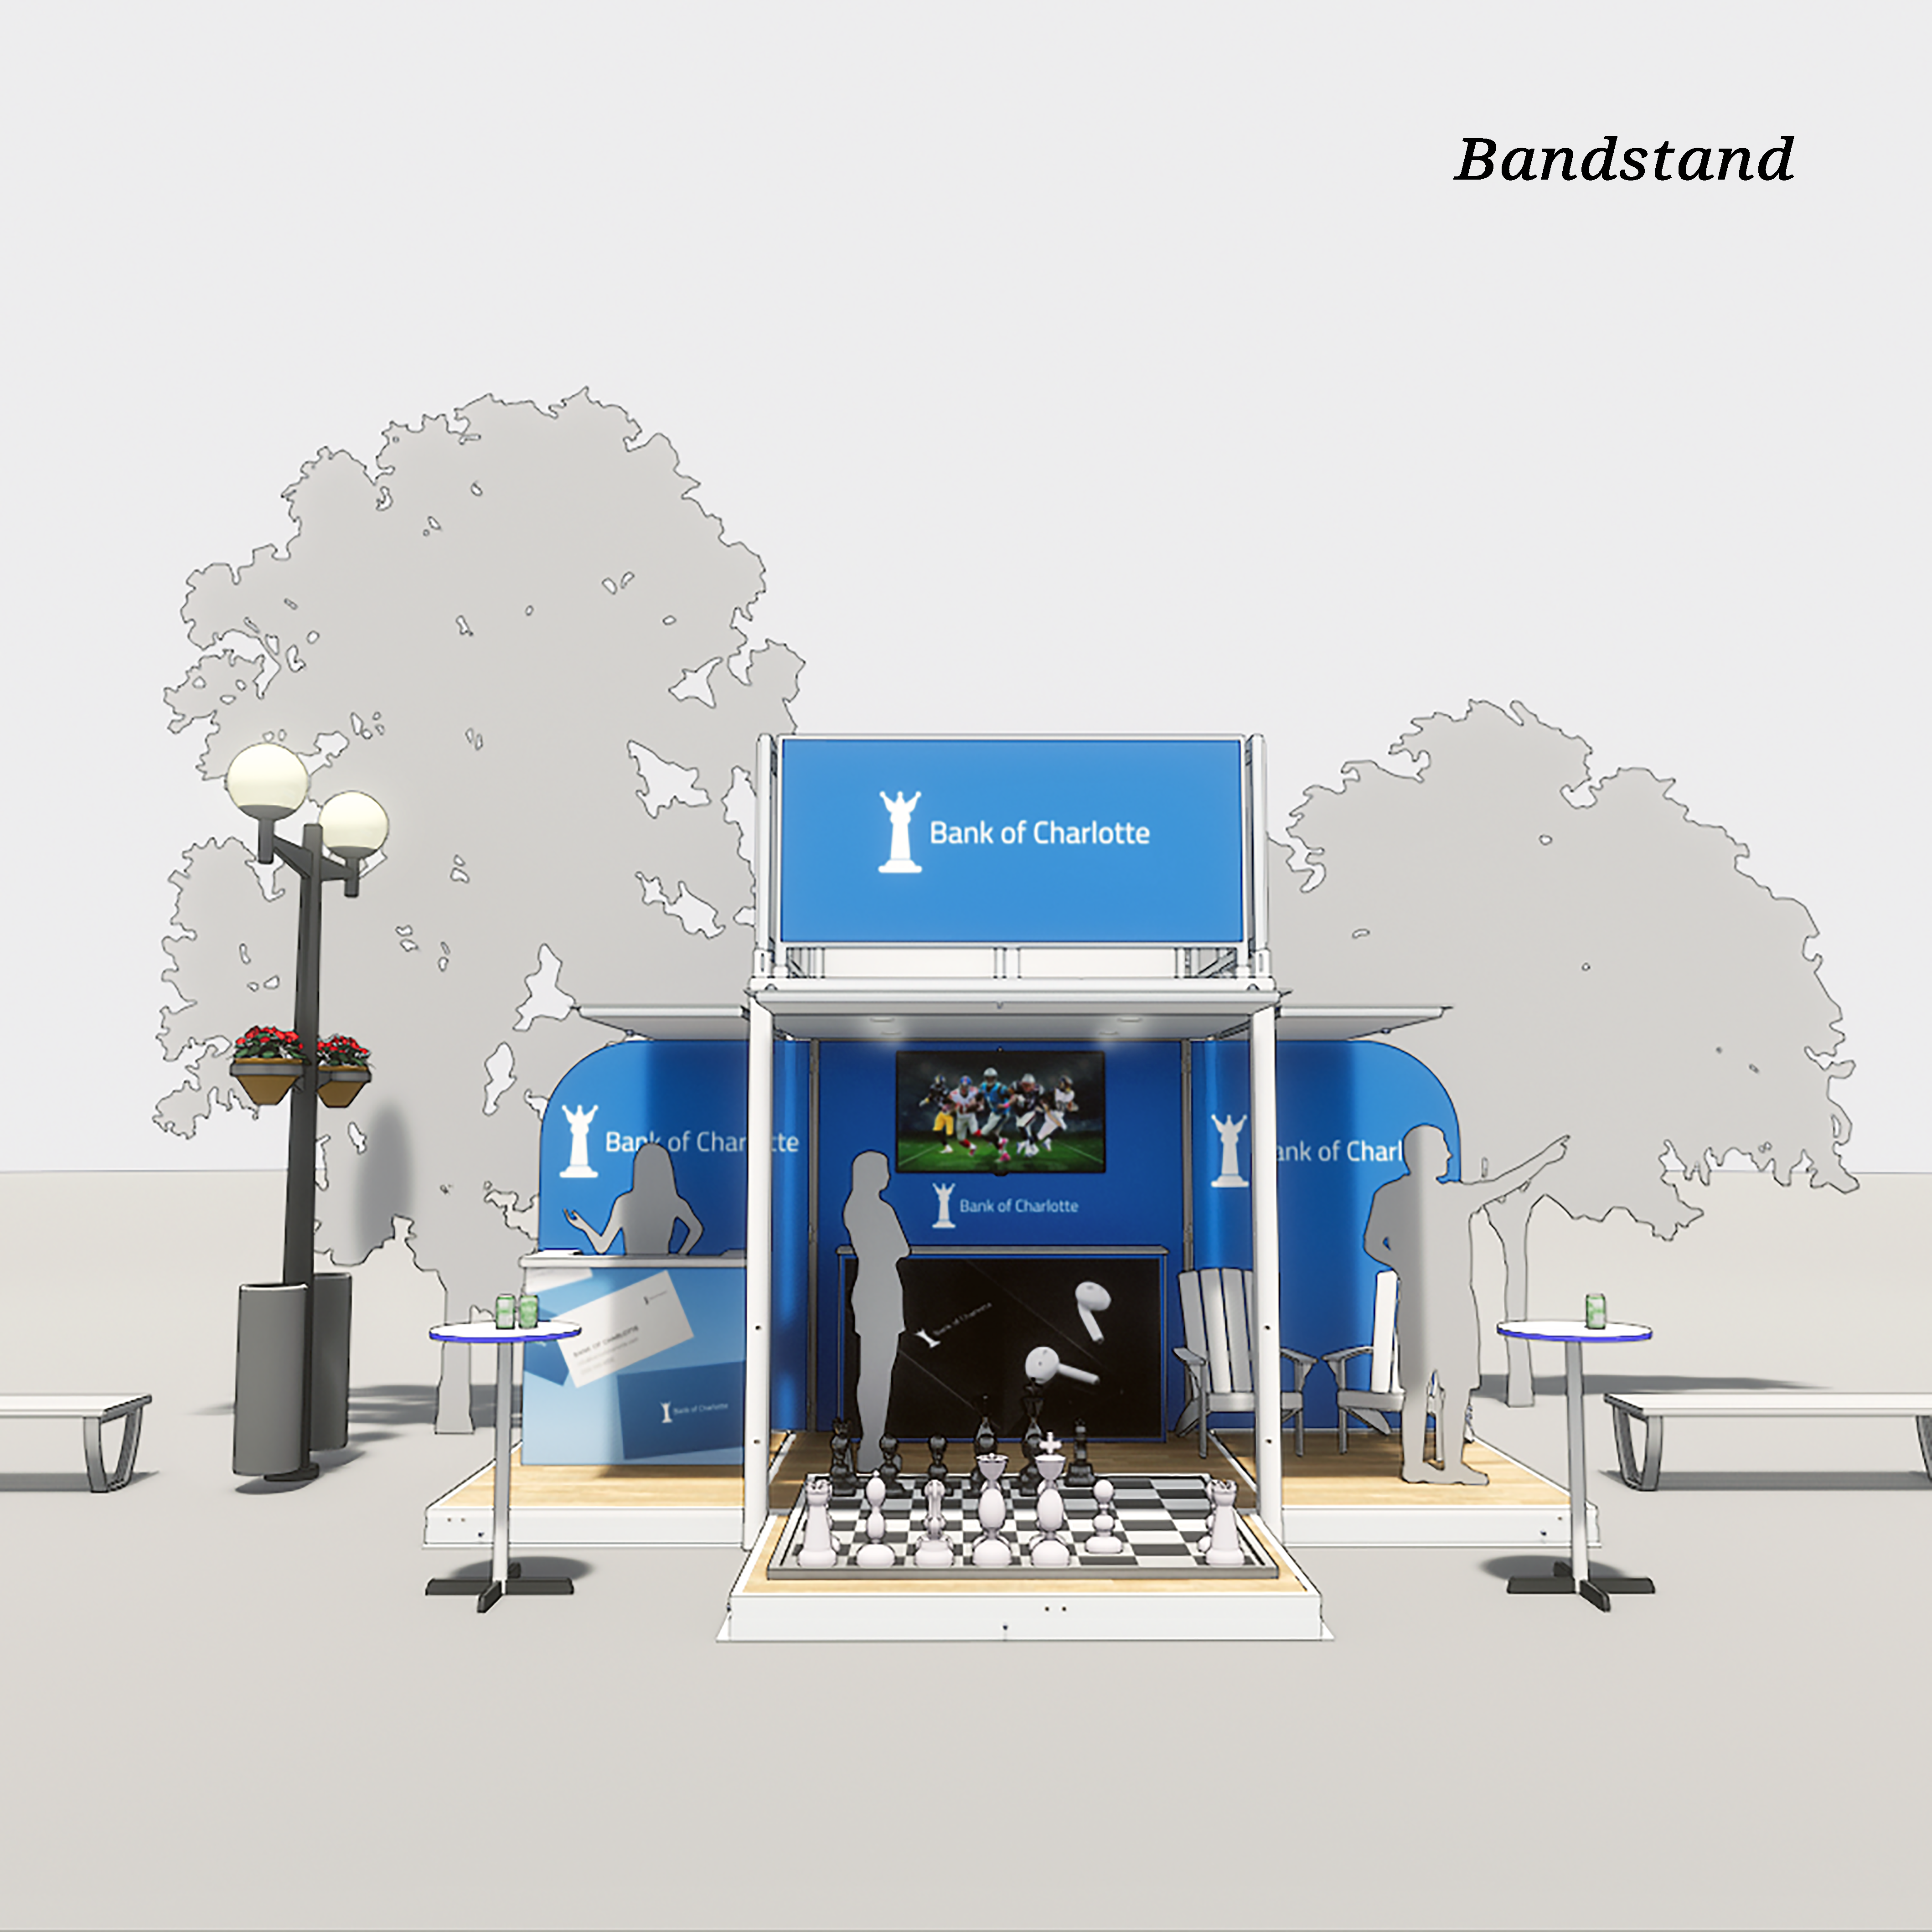 New-Bandstand-r0.png